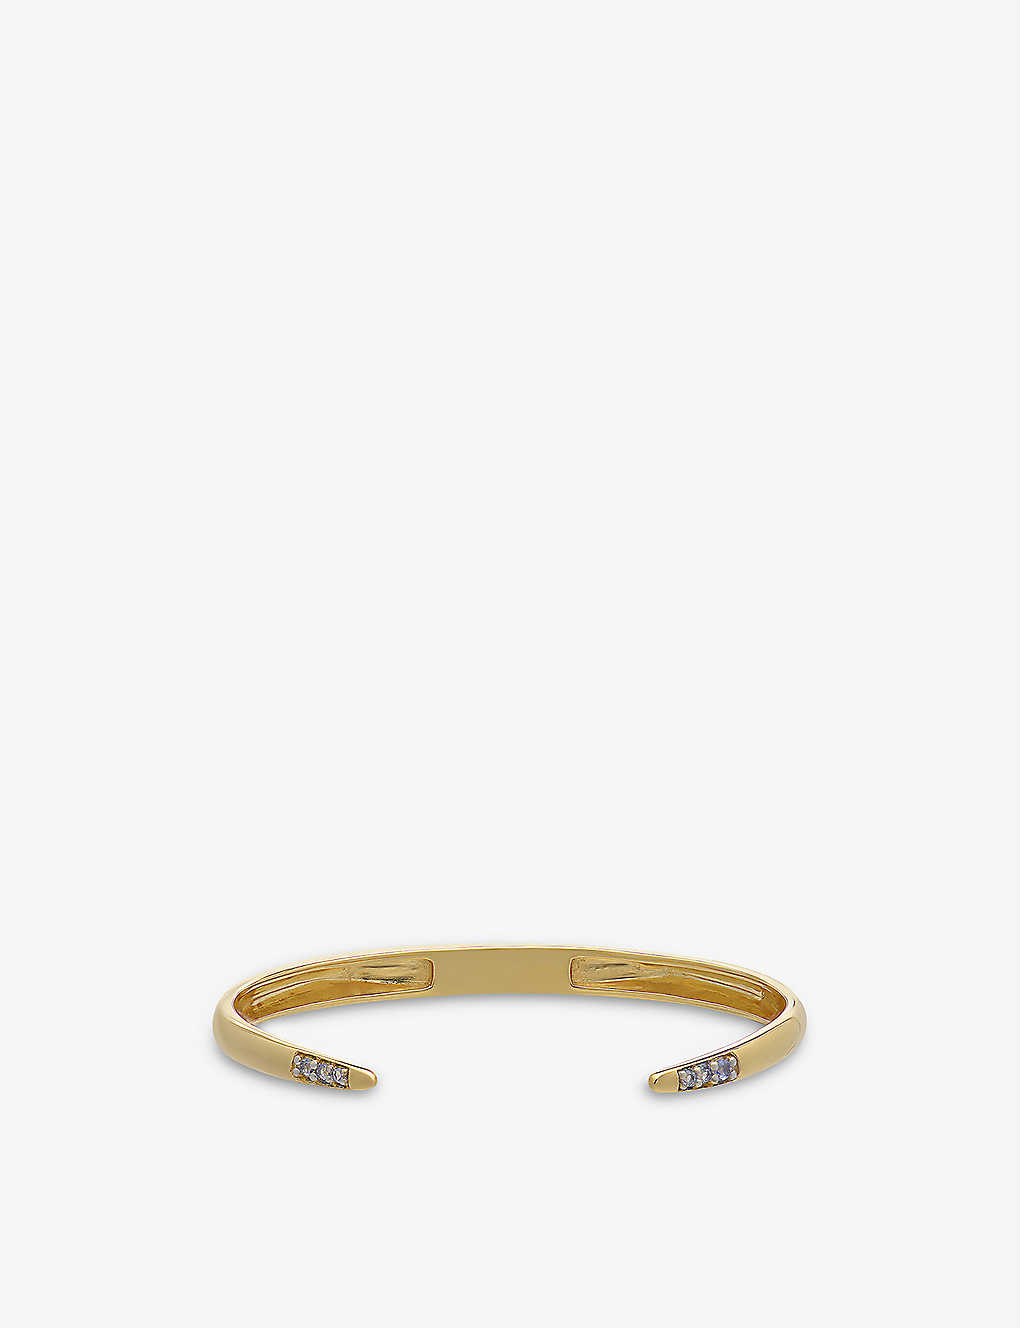 Rachel Jackson Birthstone December 22ct Gold-plated Sterling-silver And Tanzanite Bangle